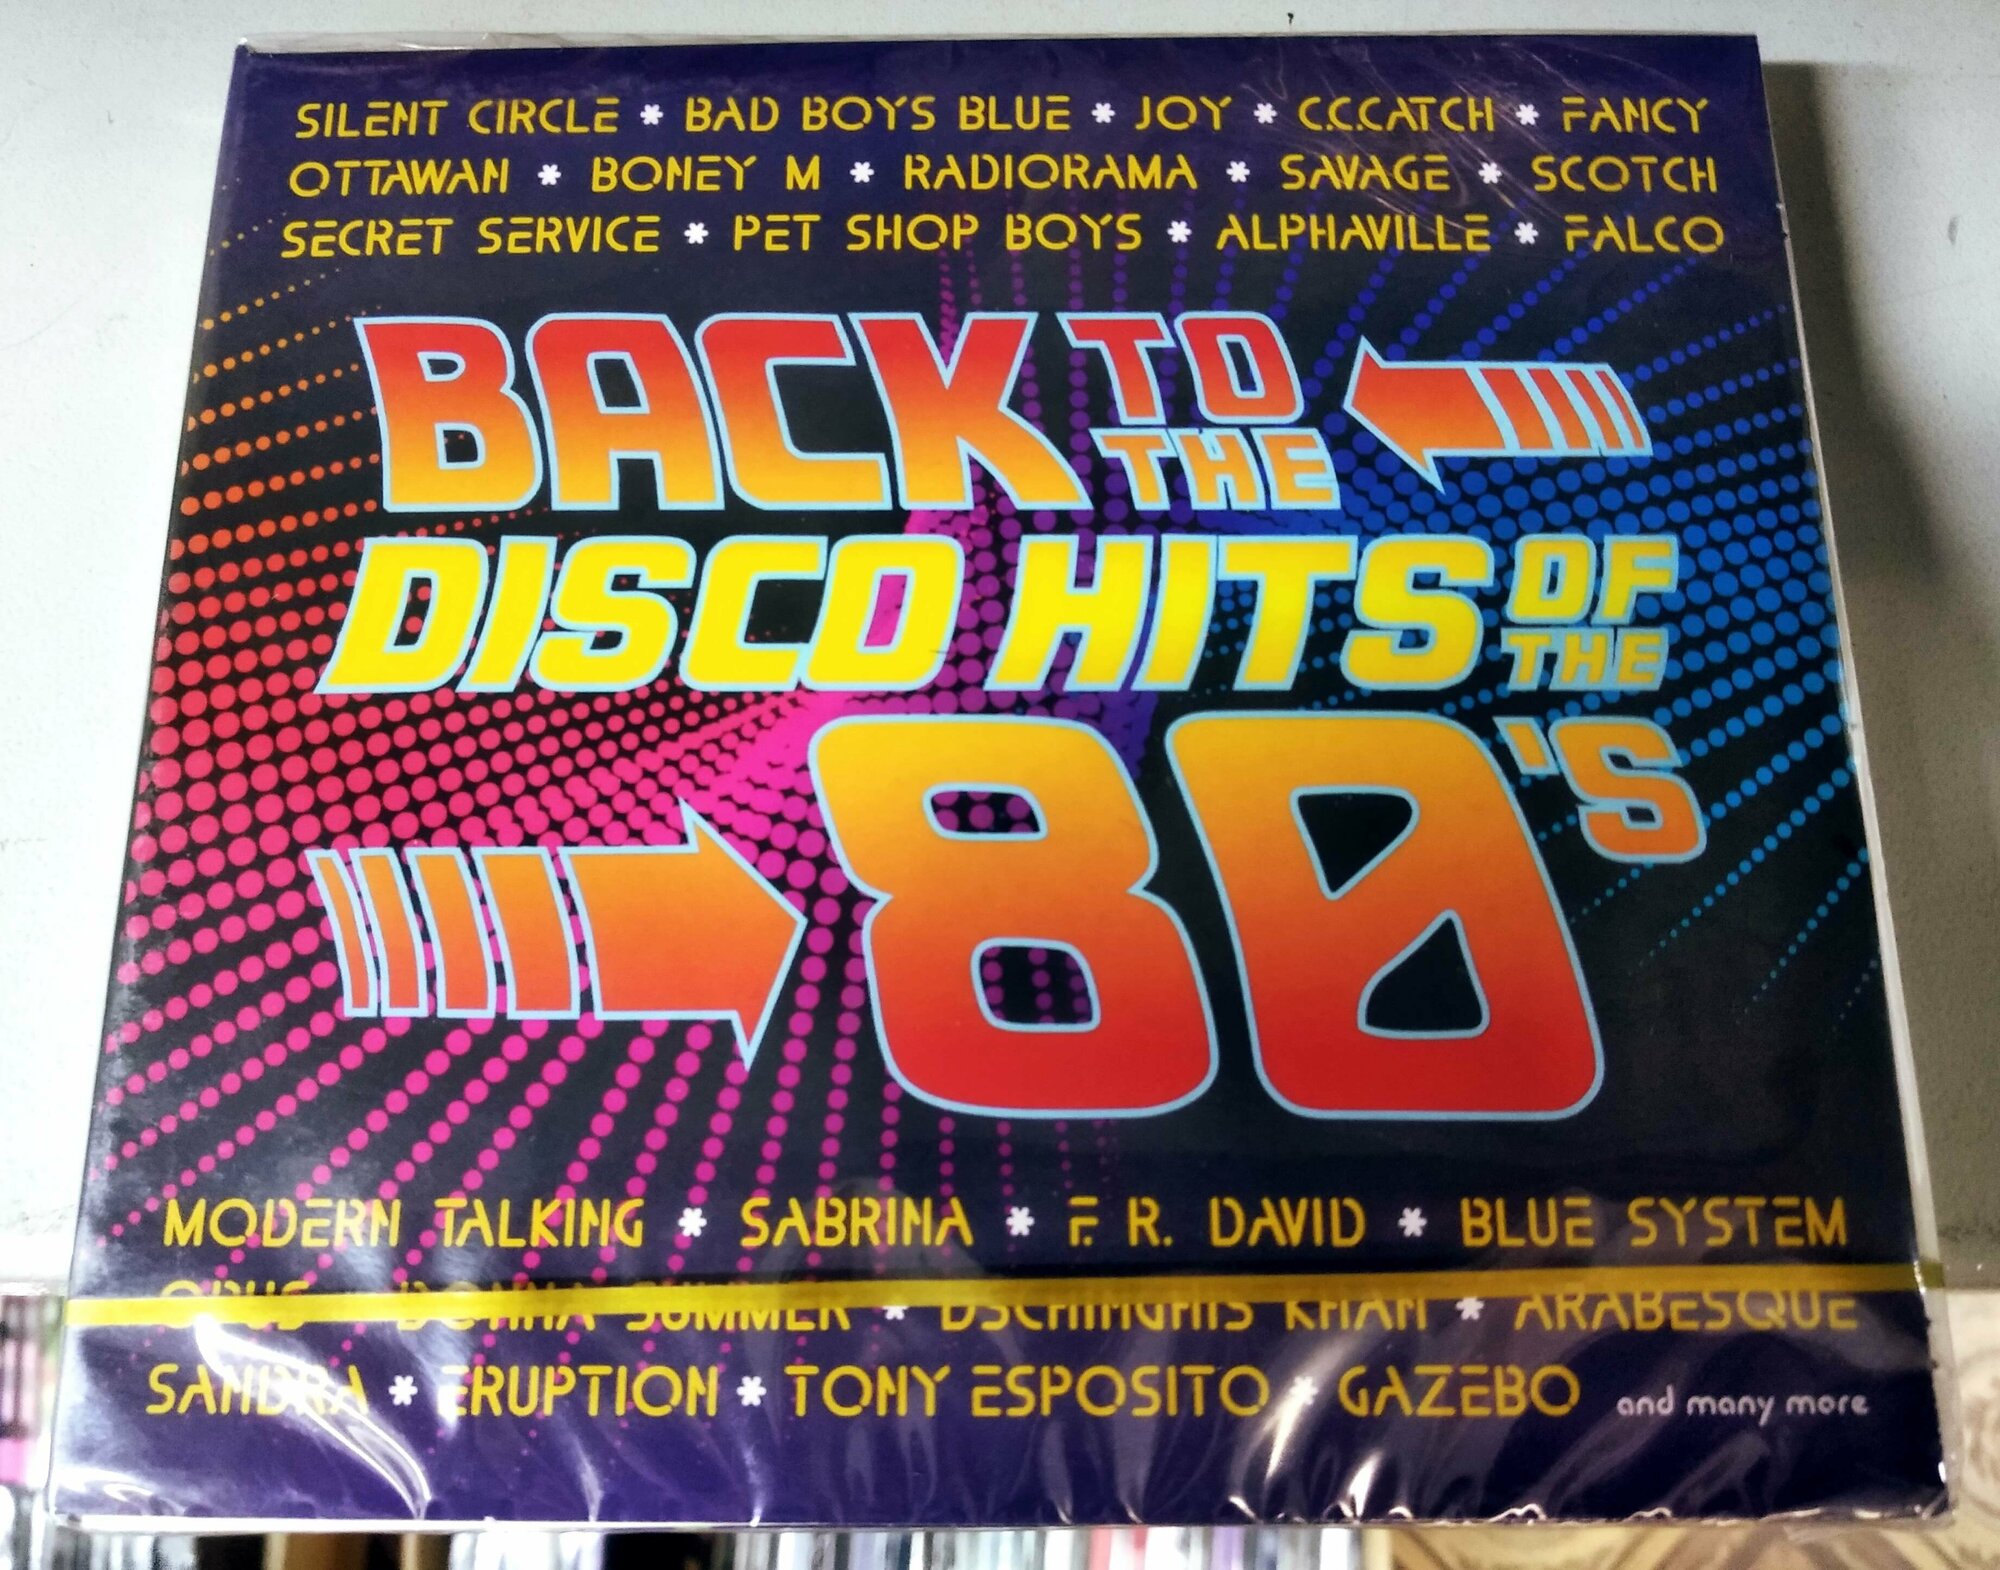 Back To The Disco Hits of The 80's 2 CD